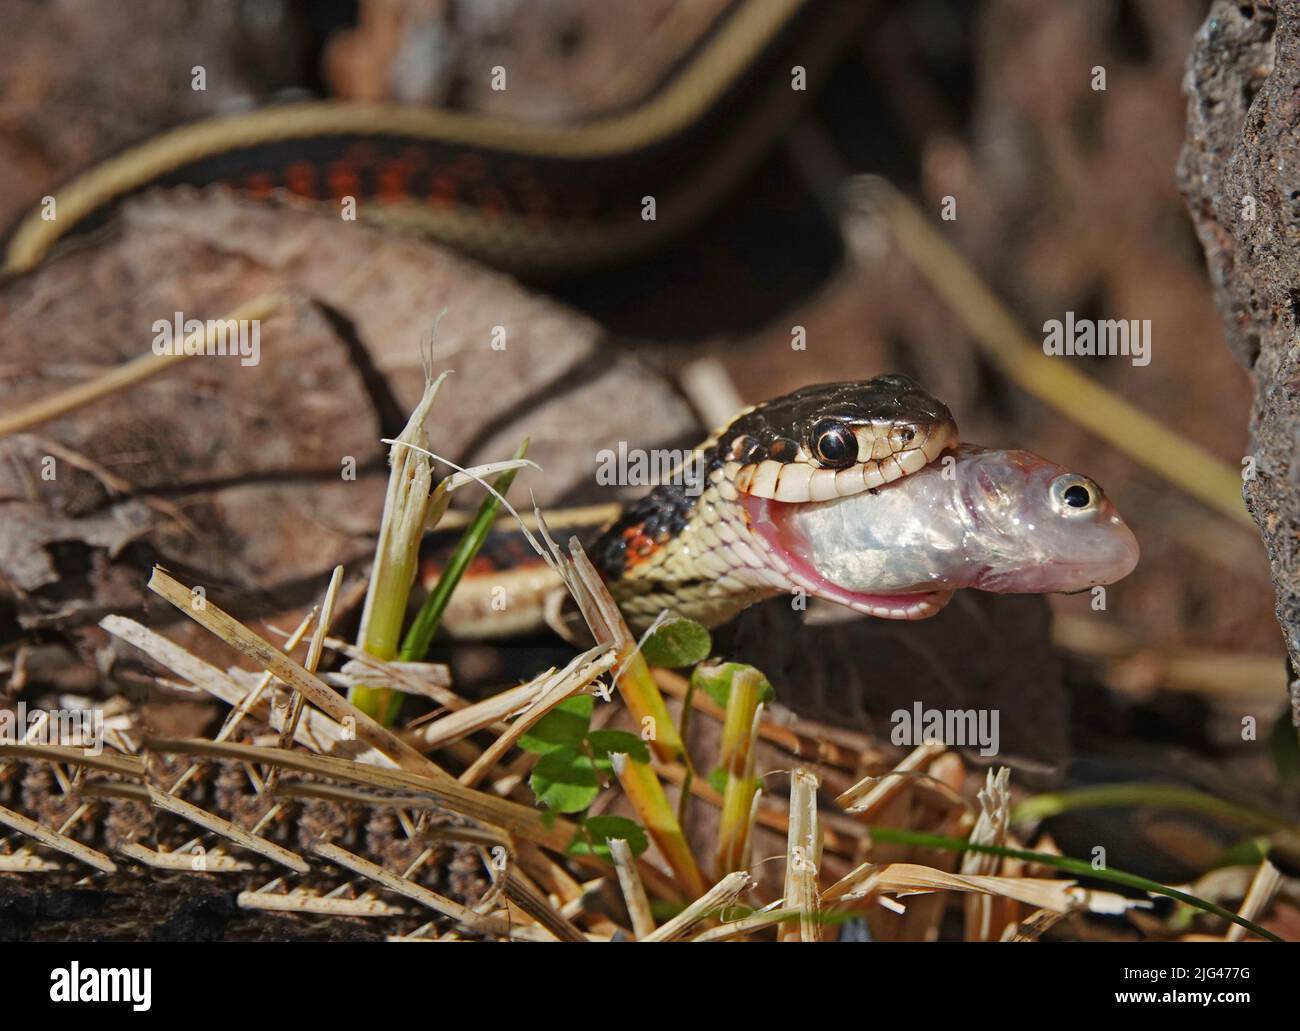 A small garter snake swallows a minnow it has just captured from a pond in central Oregon. Stock Photo